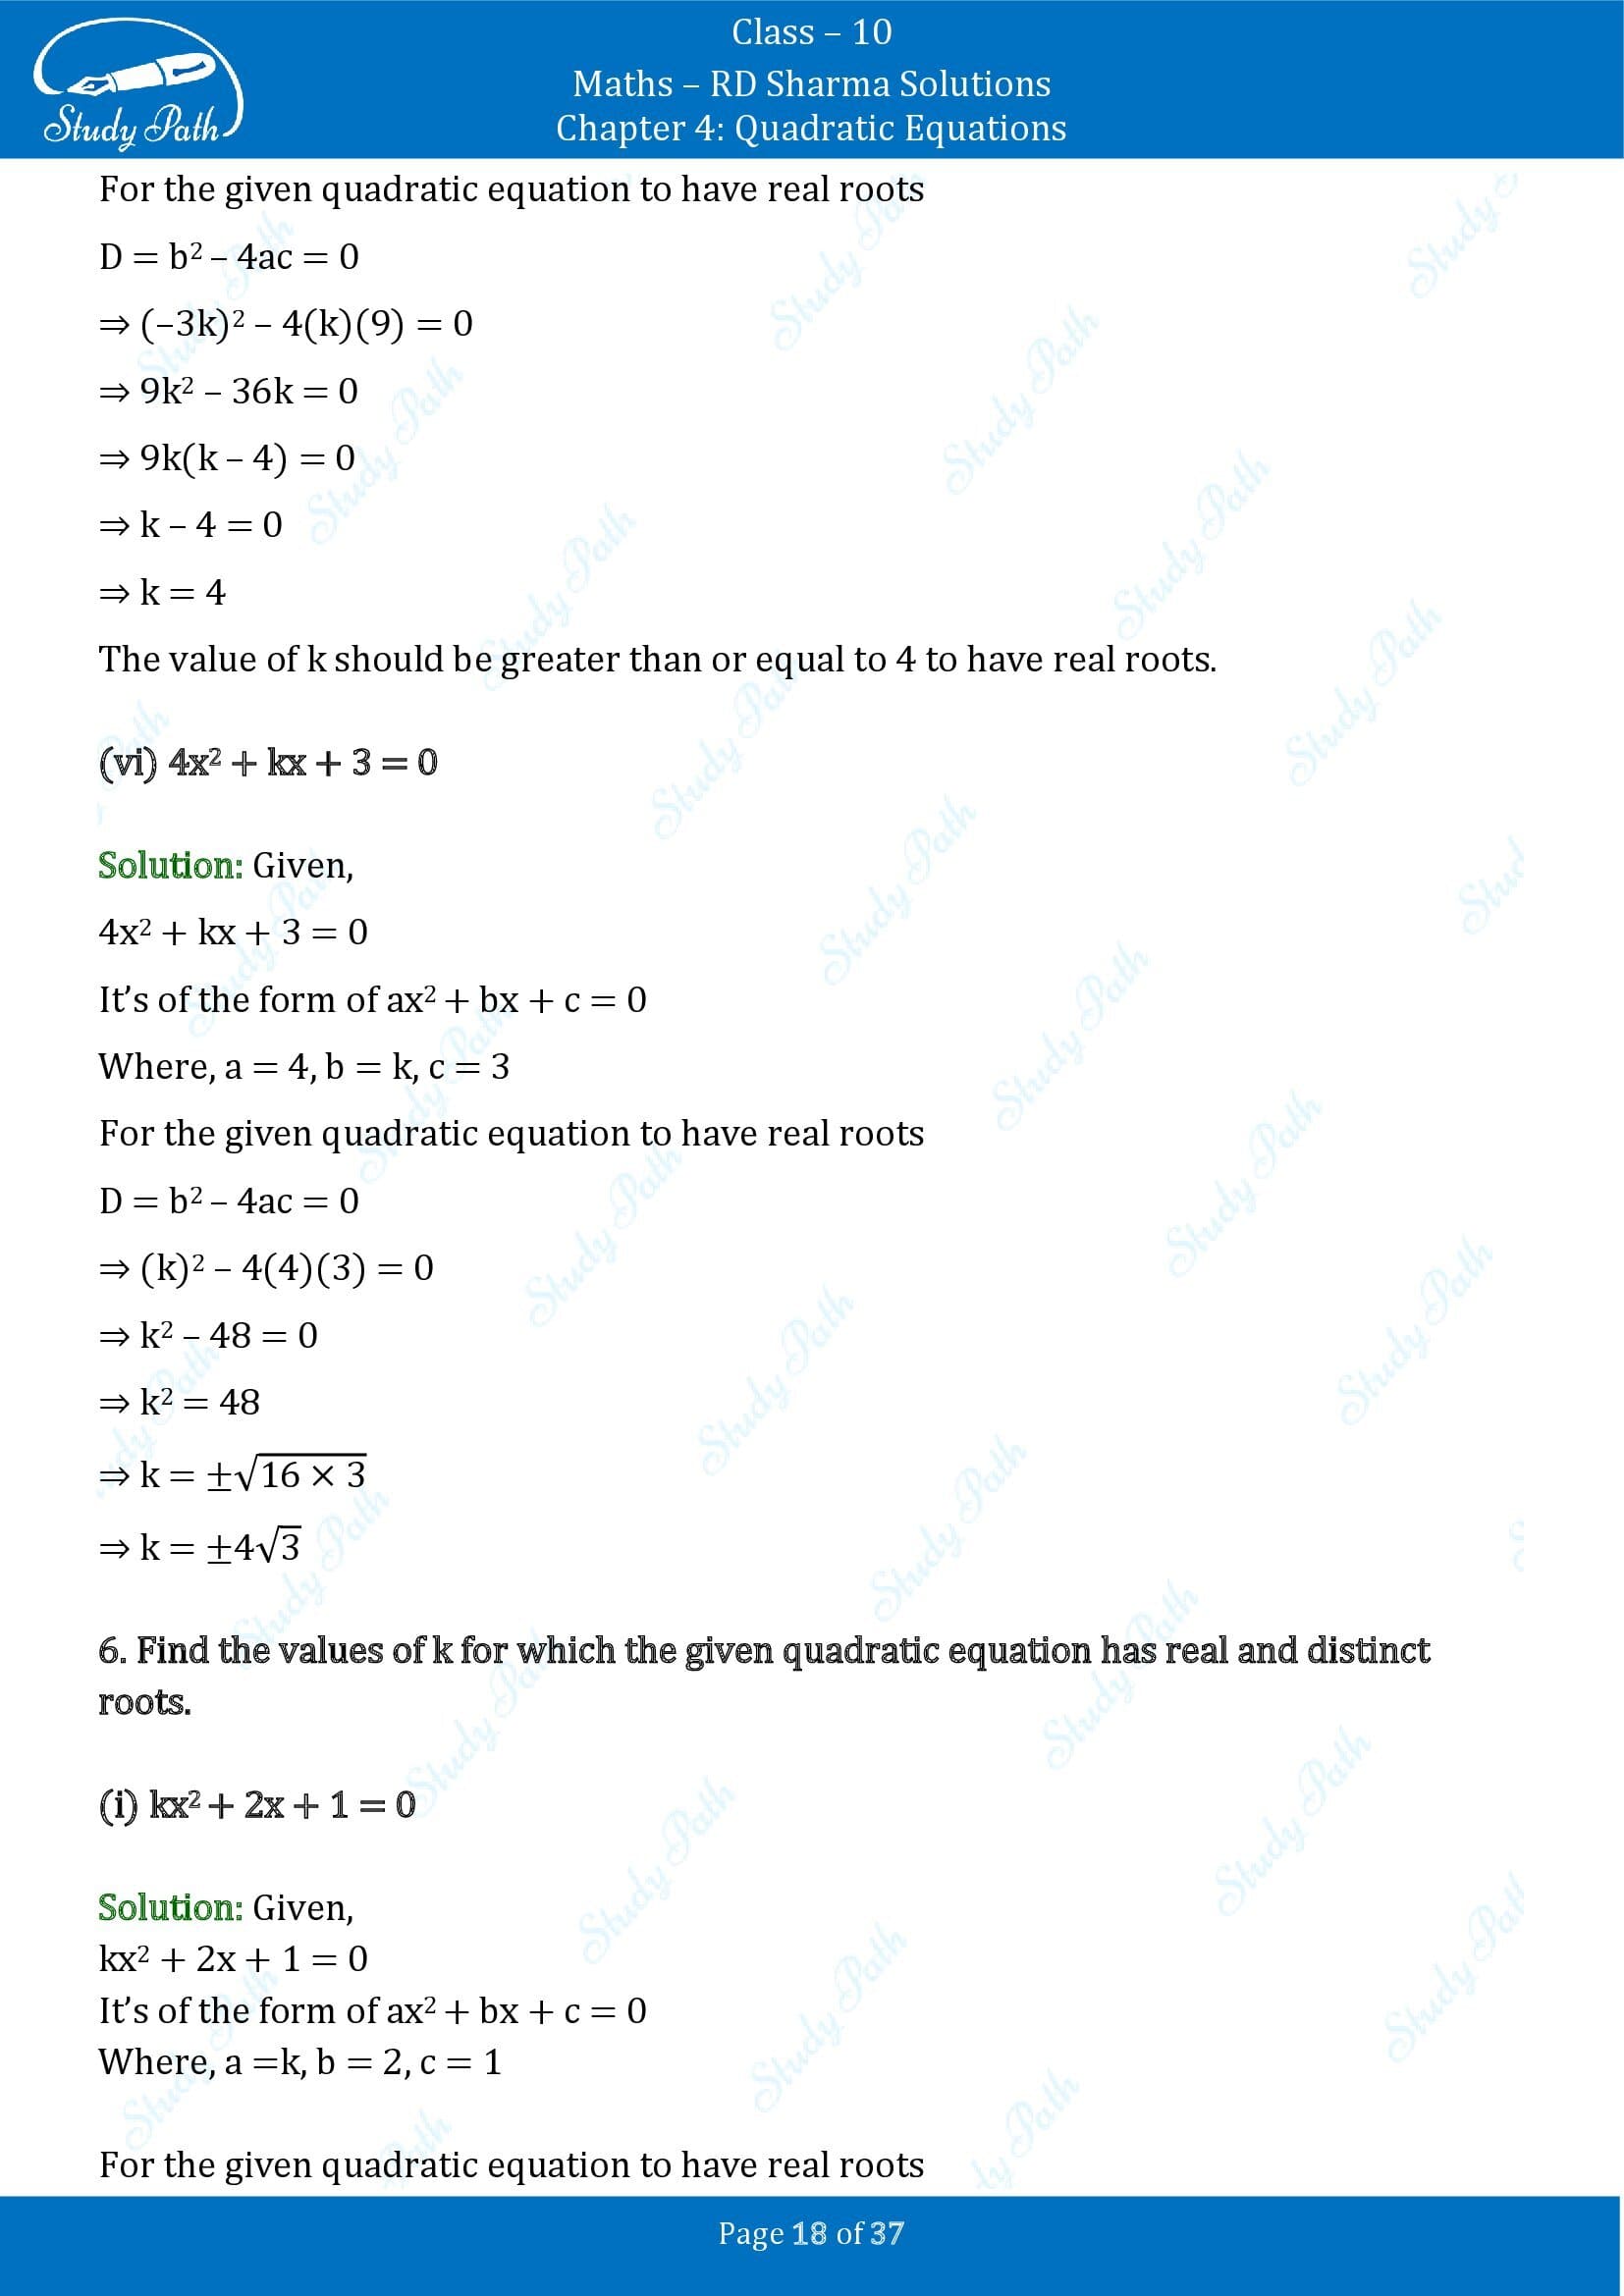 RD Sharma Solutions Class 10 Chapter 4 Quadratic Equations Exercise 4.6 00018